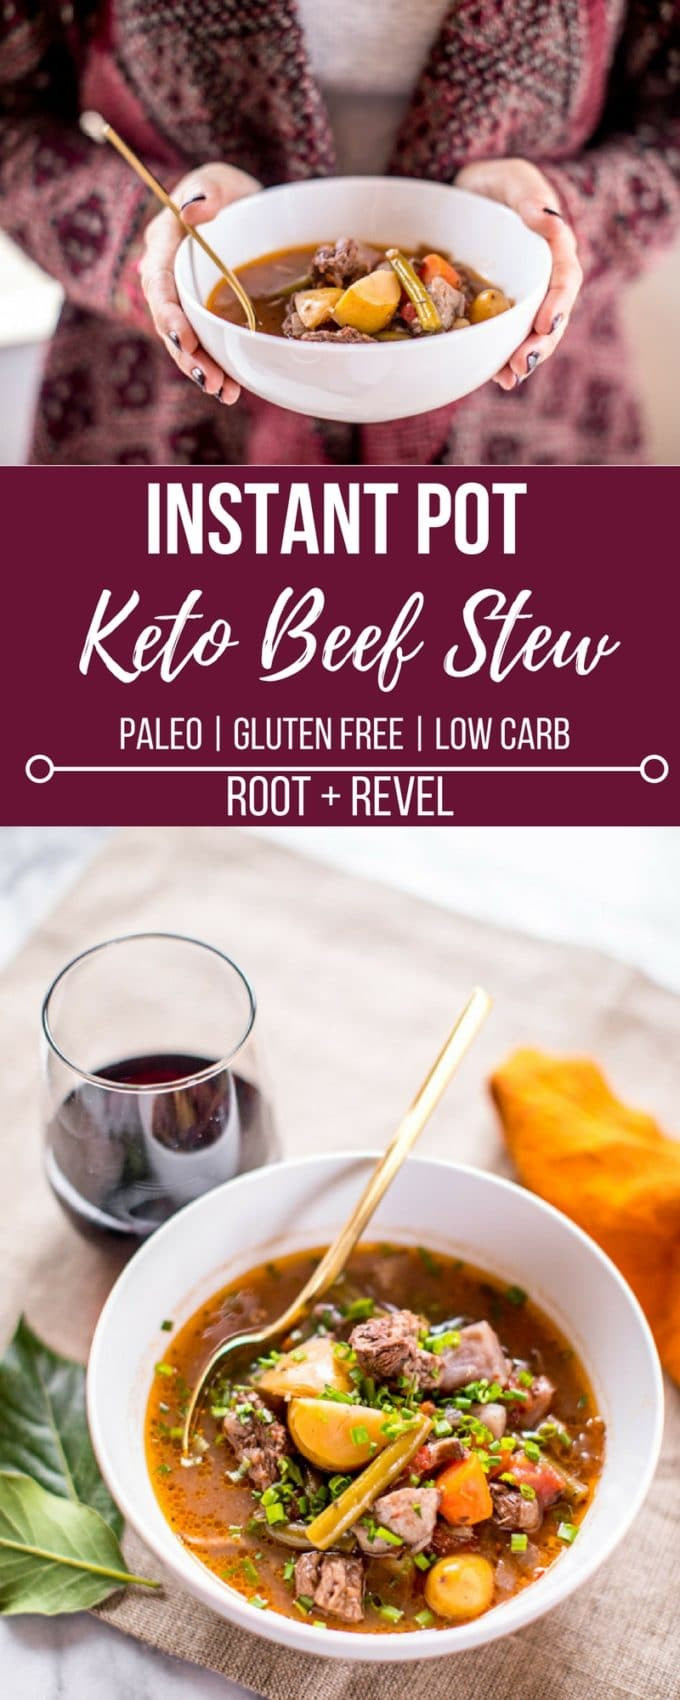 Crock Pot Keto Beef Stew
 Keto Beef Stew in the Instant Pot or Slow Cooker